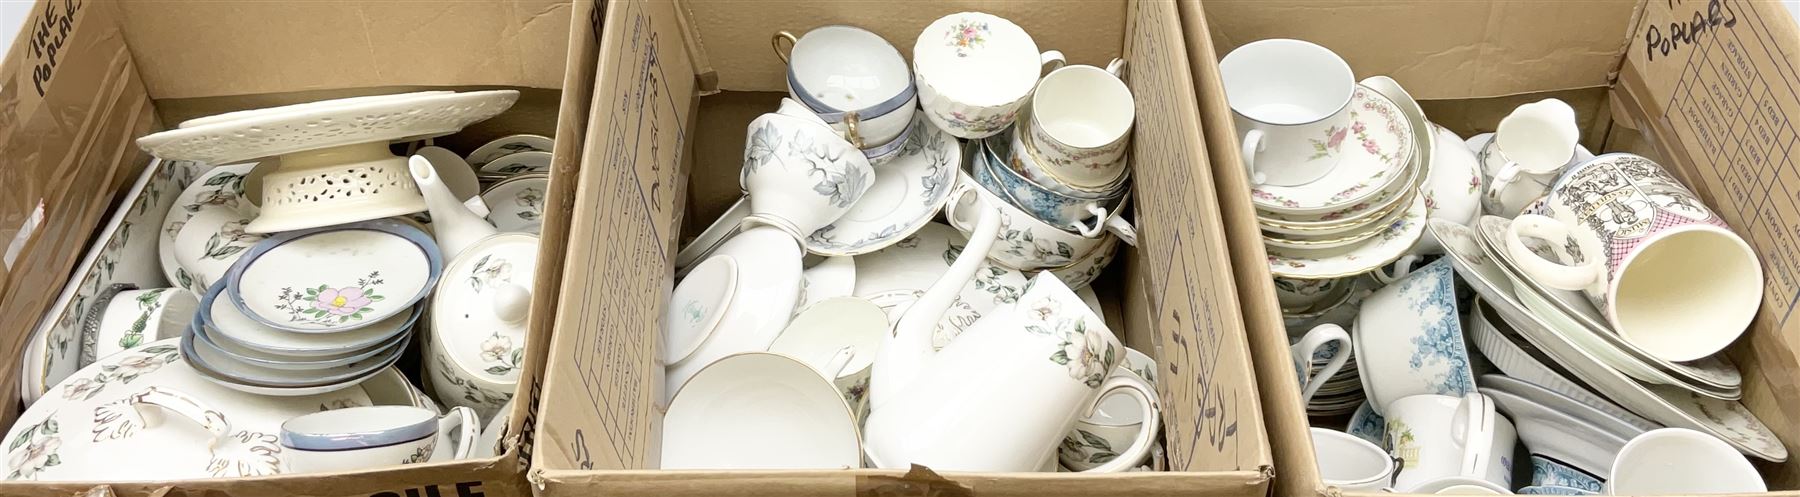 Collection of tea and dinner wares